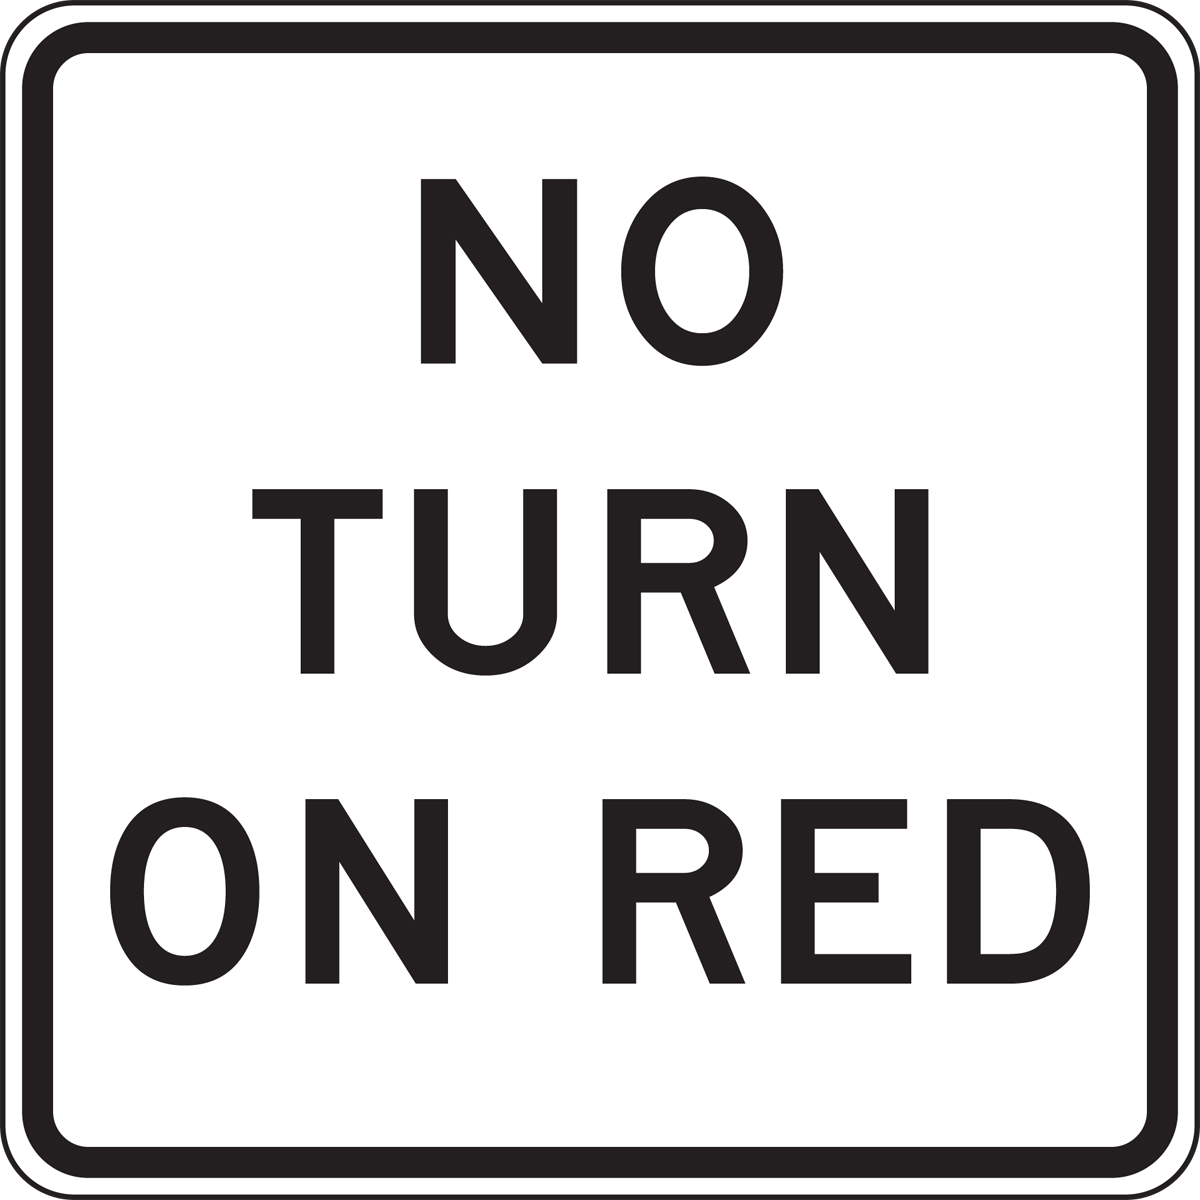 NO TURN ON RED